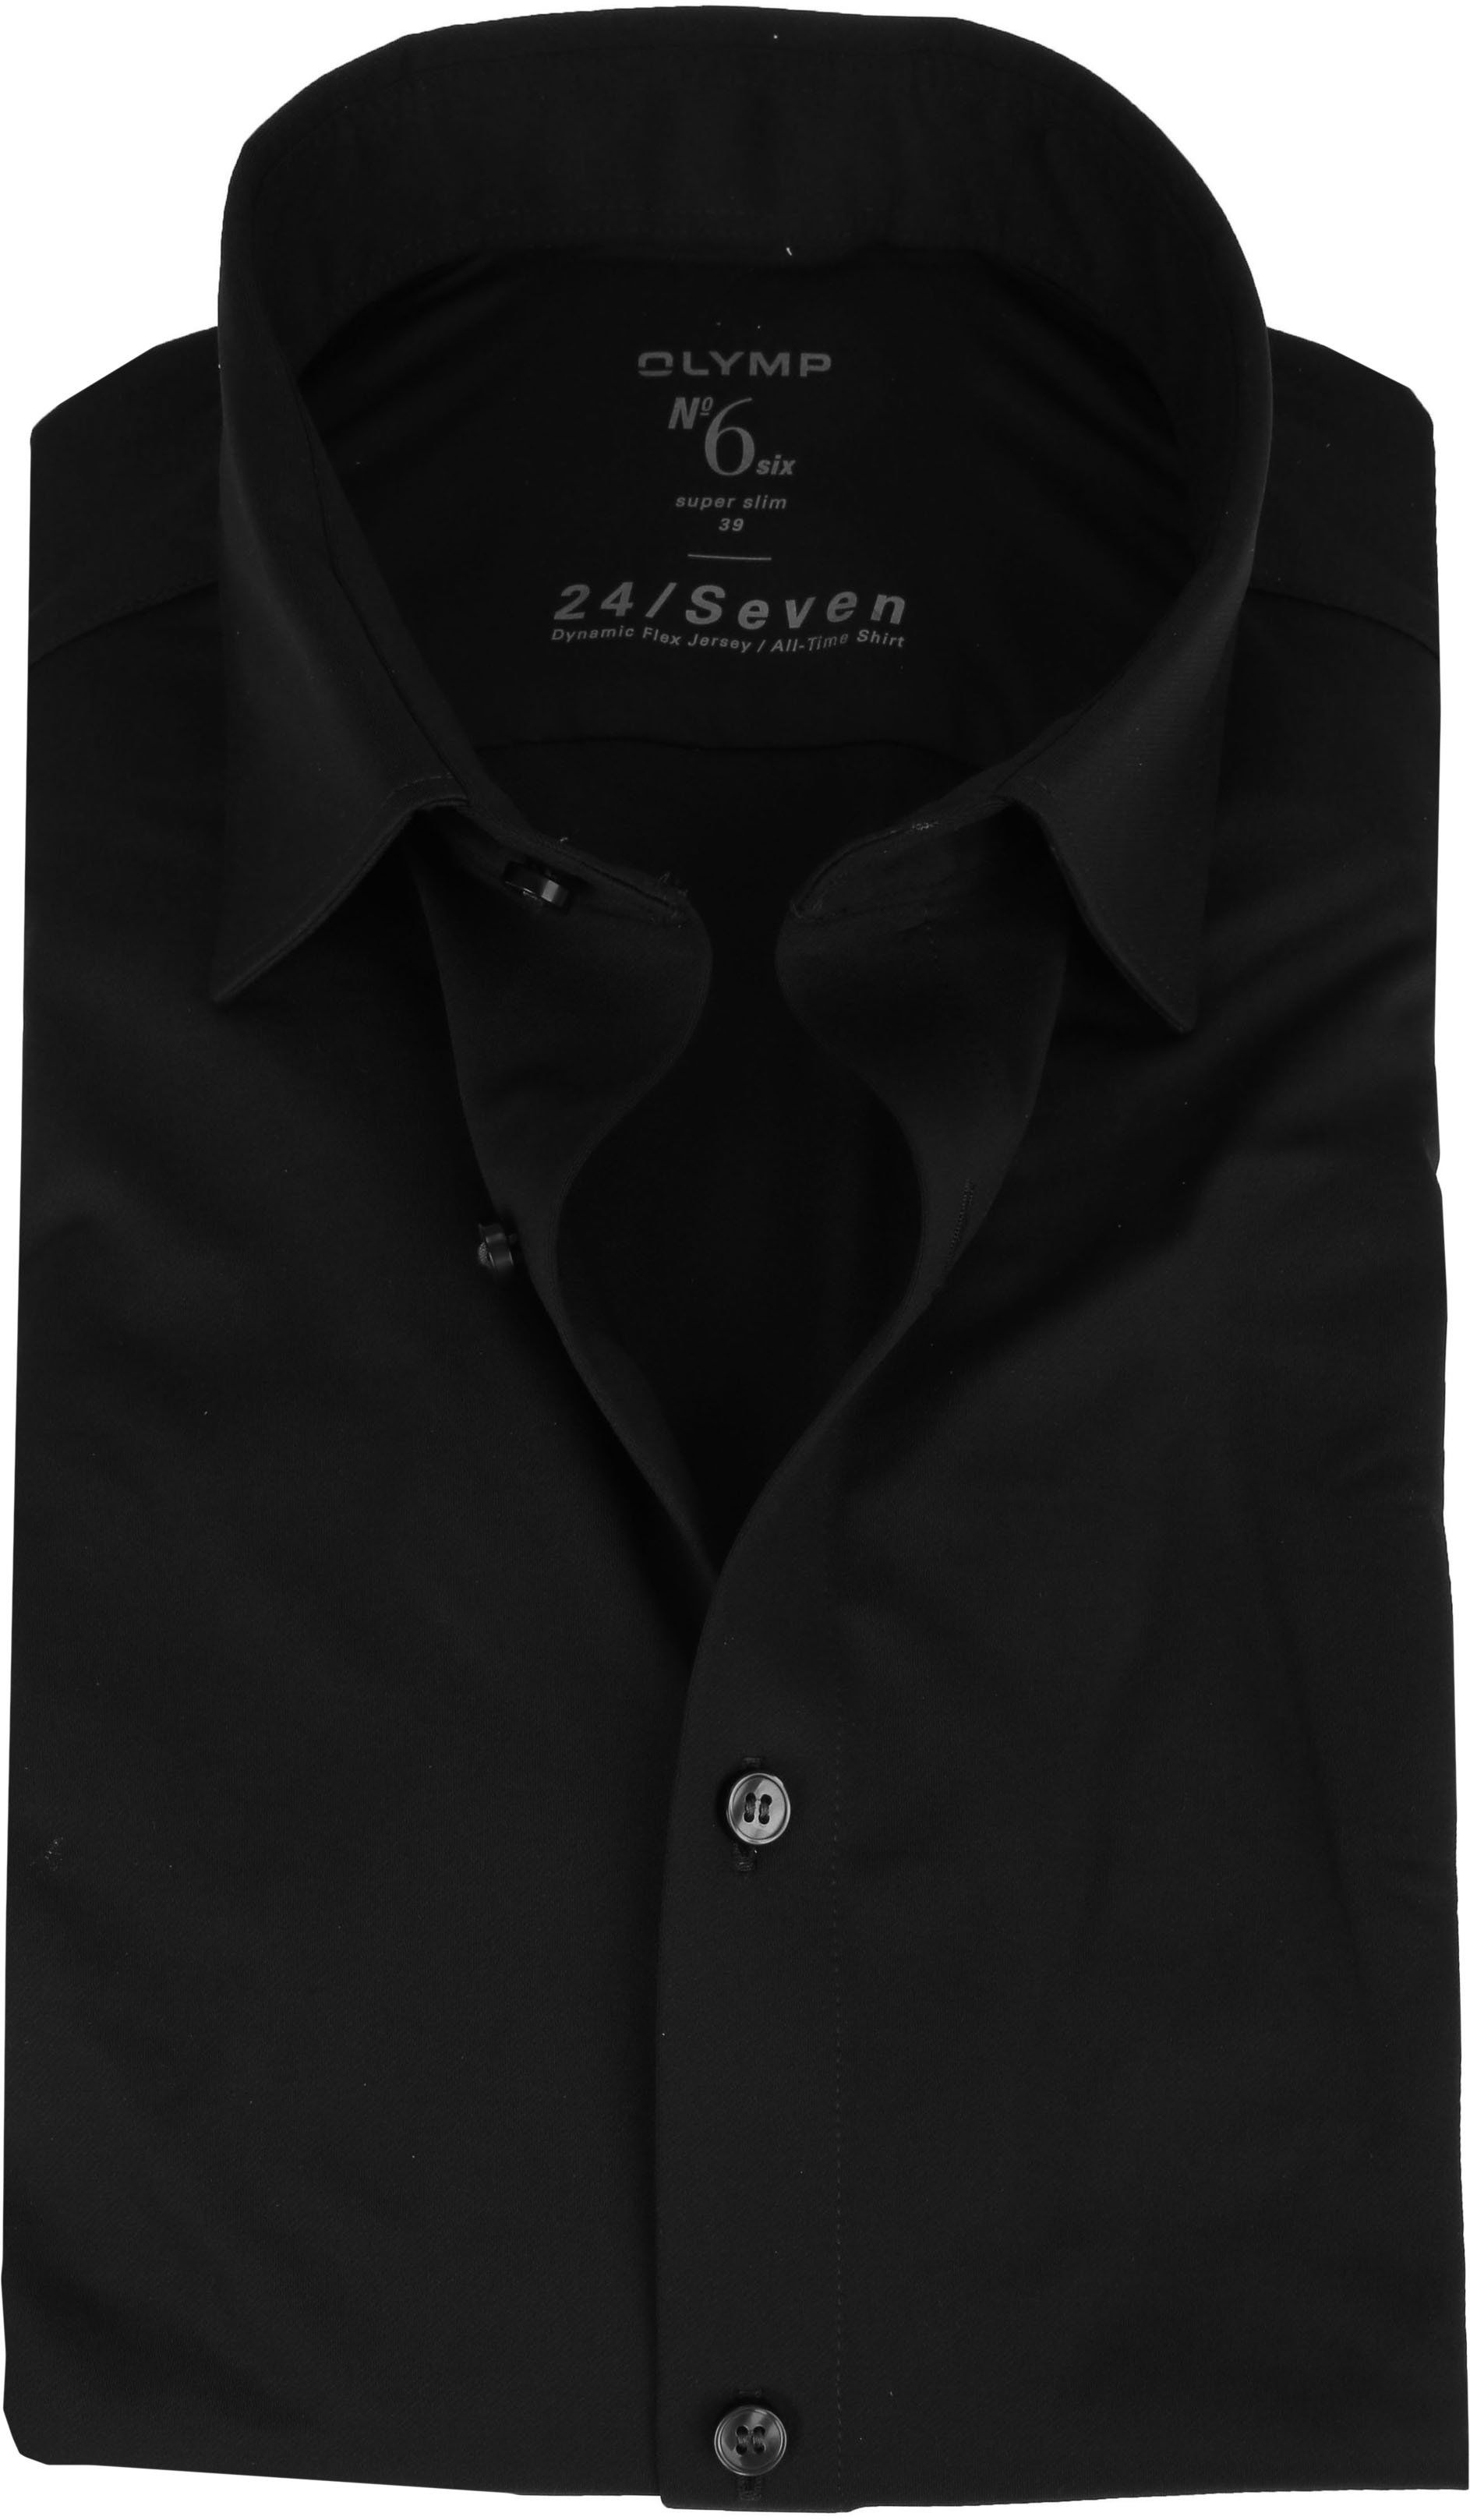 OLYMP Chemise No'6 24/Seven Noir taille 36